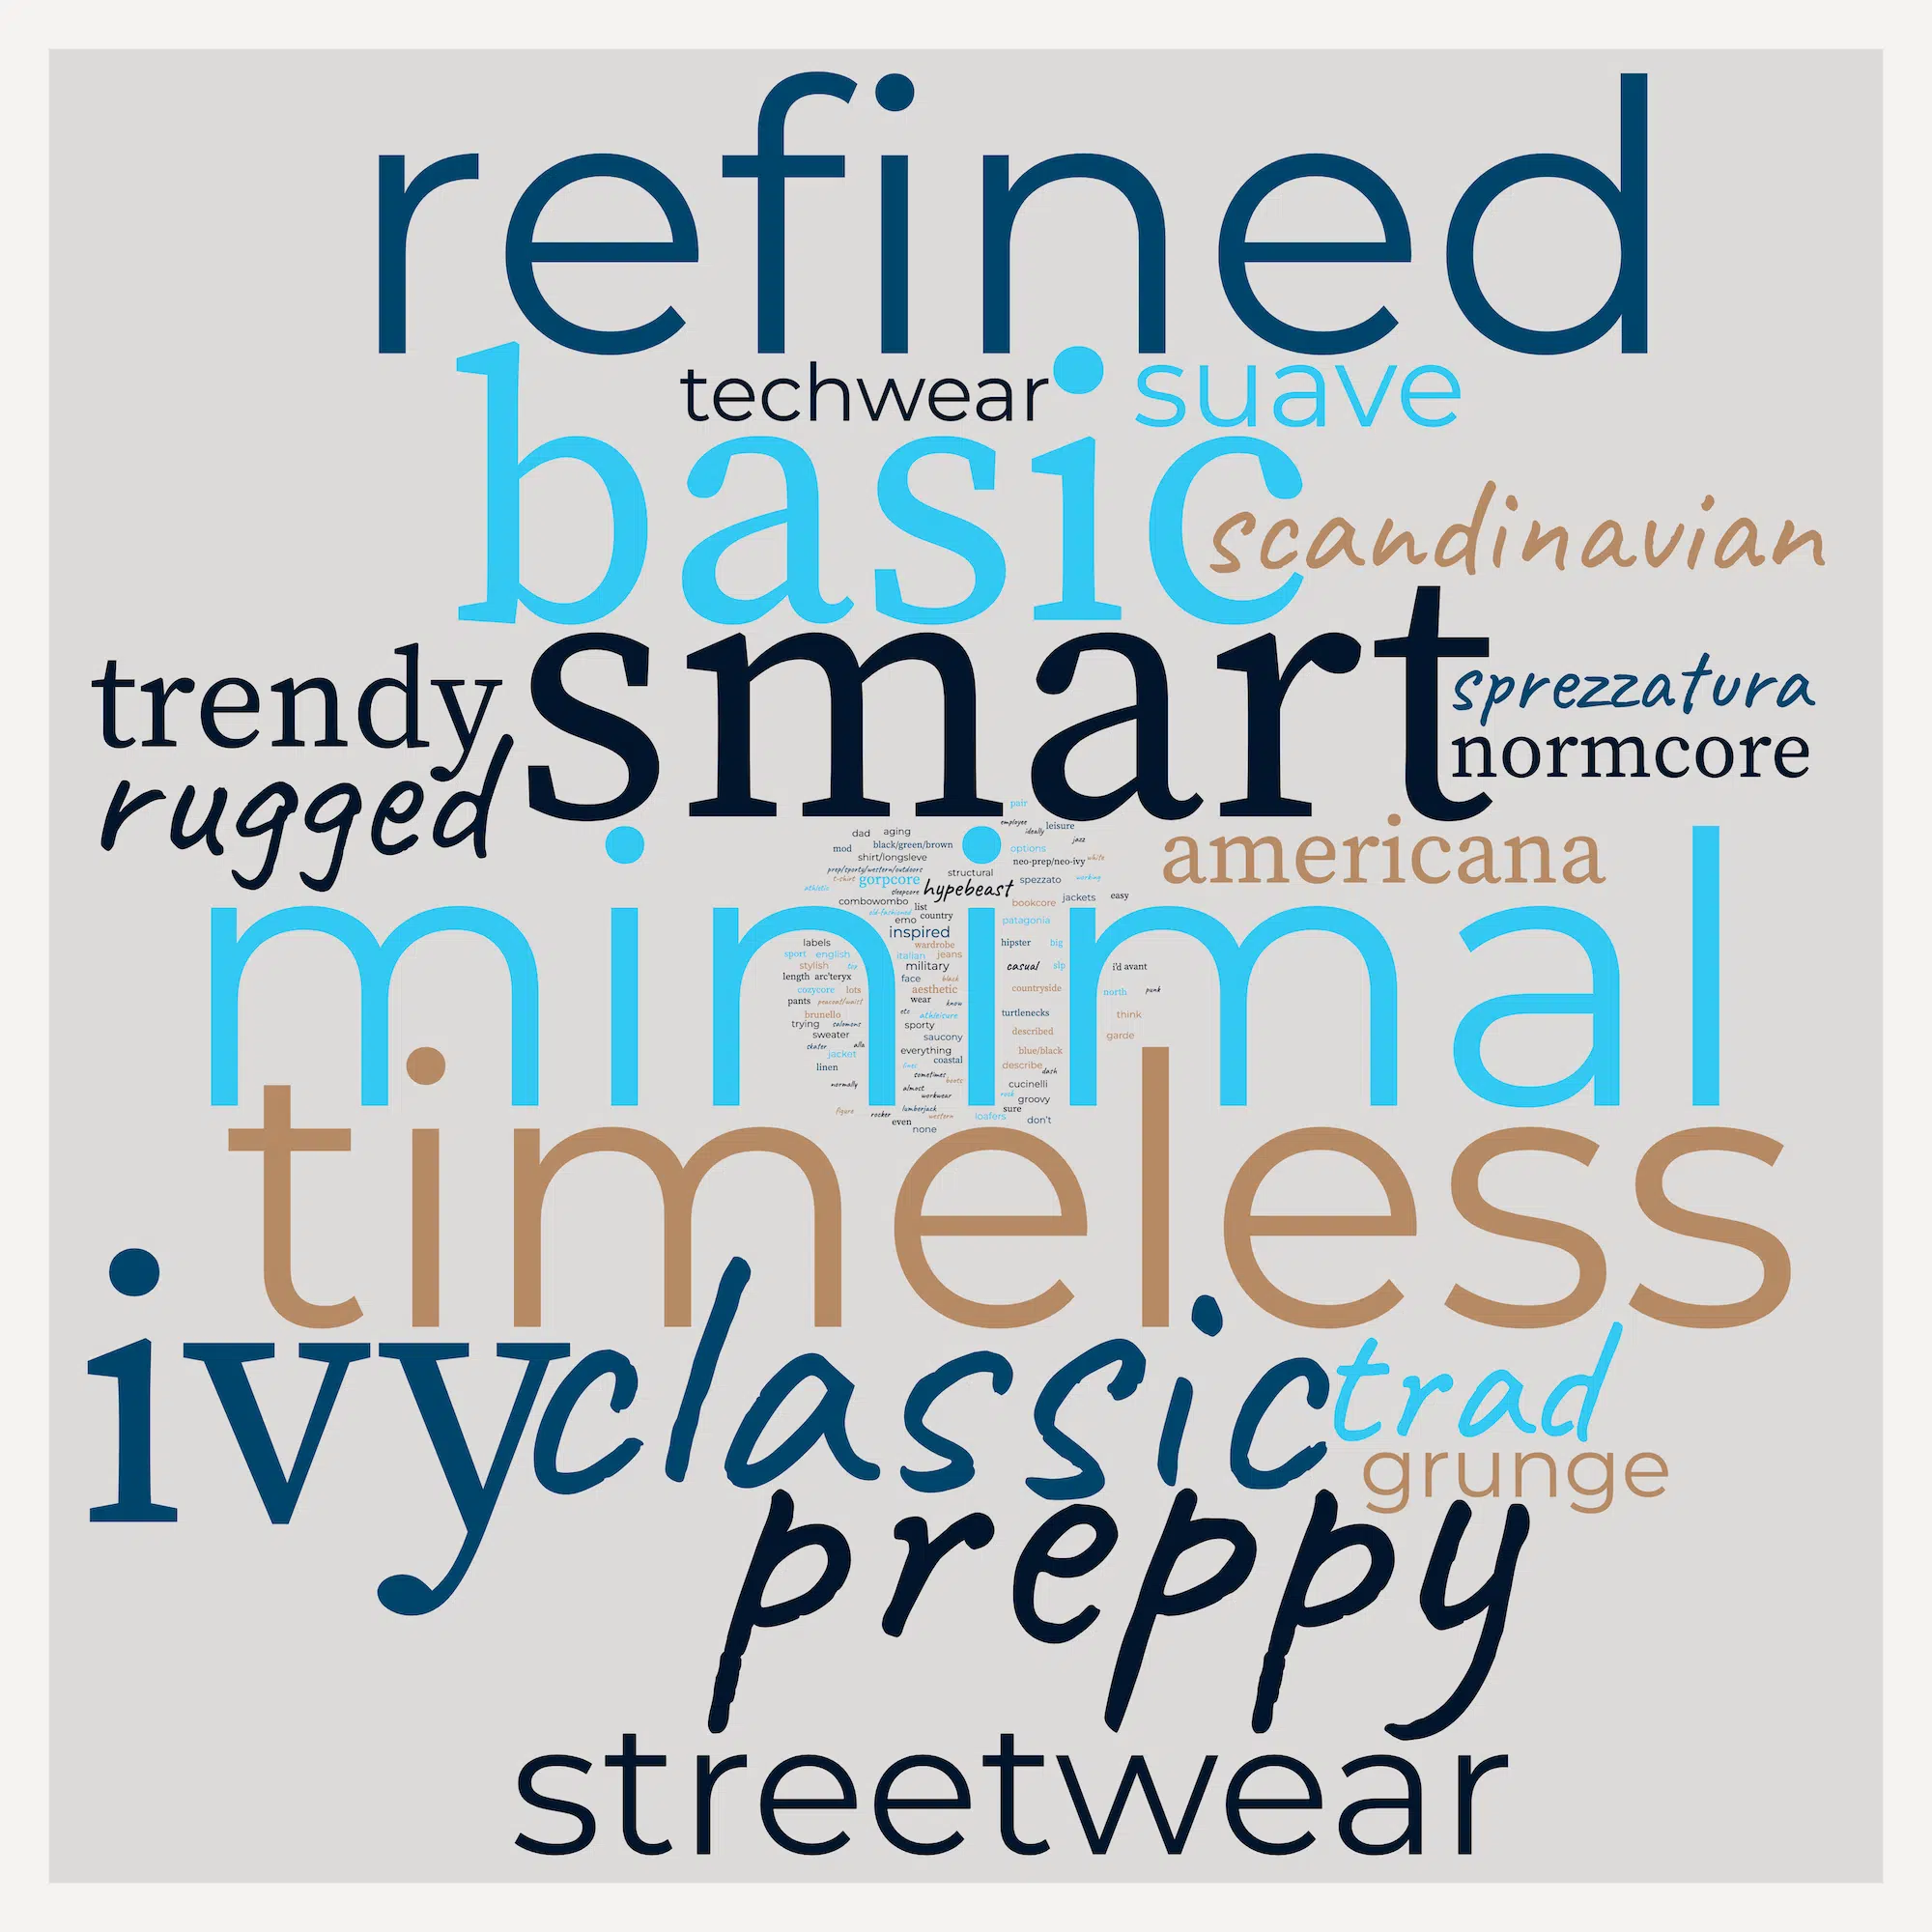 Personal style adjectives